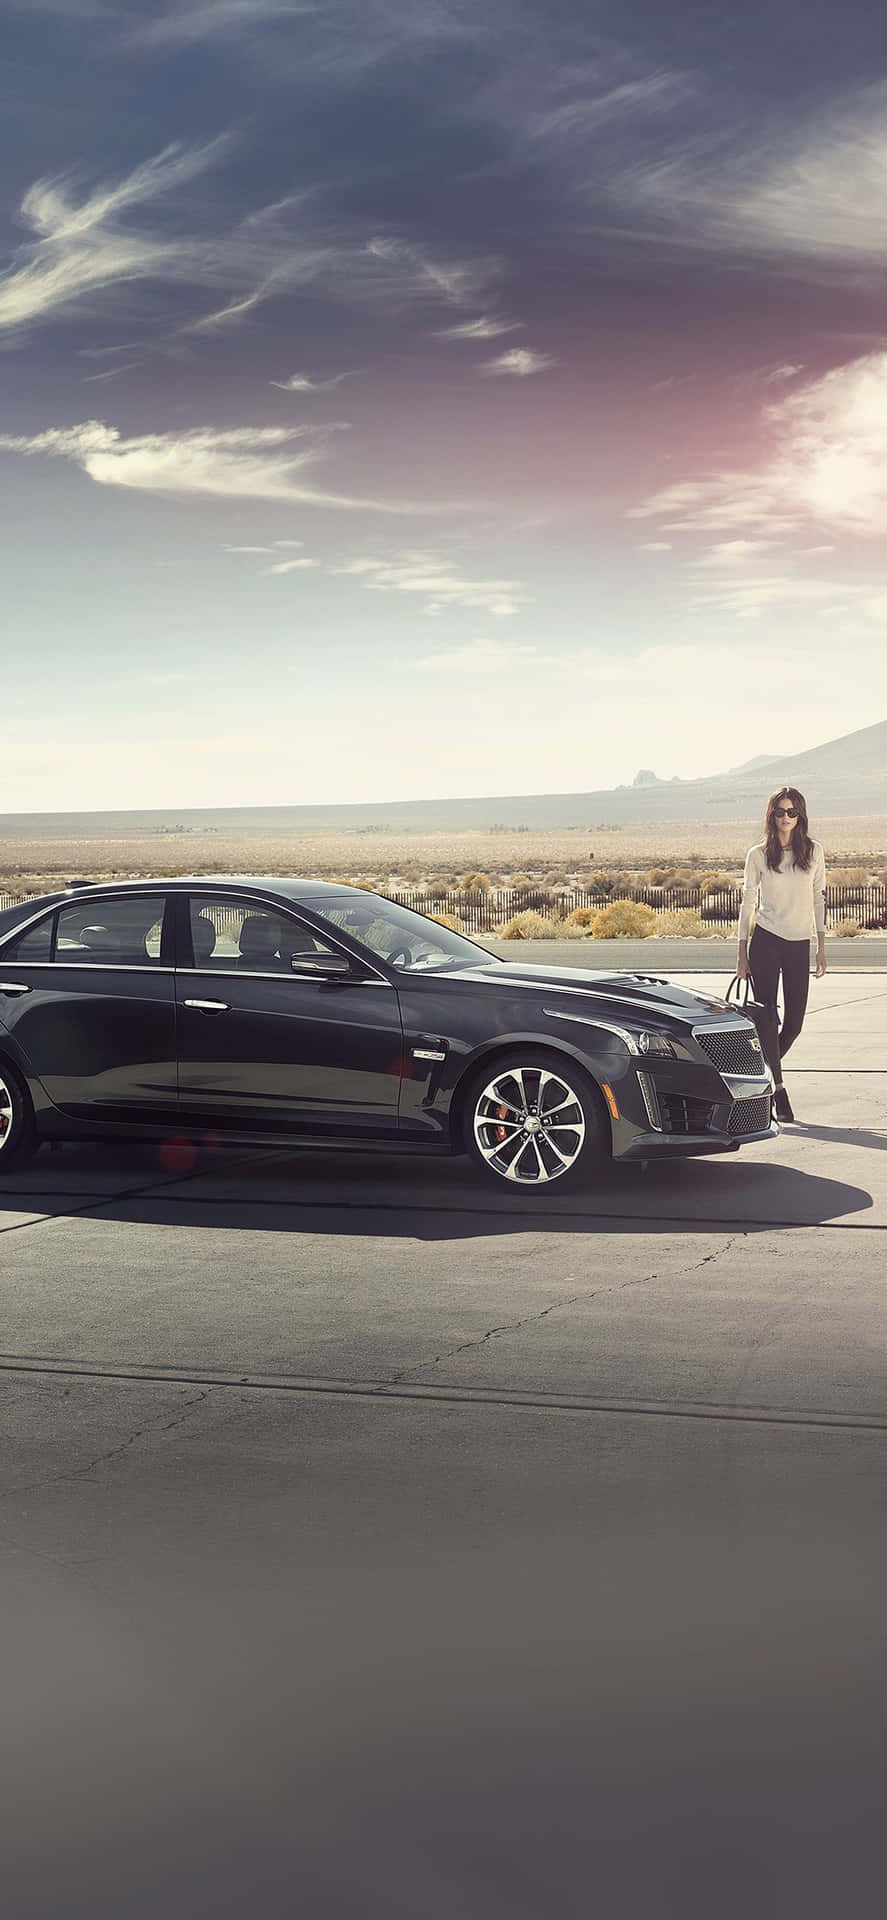 Sleek Silver Cadillac CTS on a Scenic Road Wallpaper